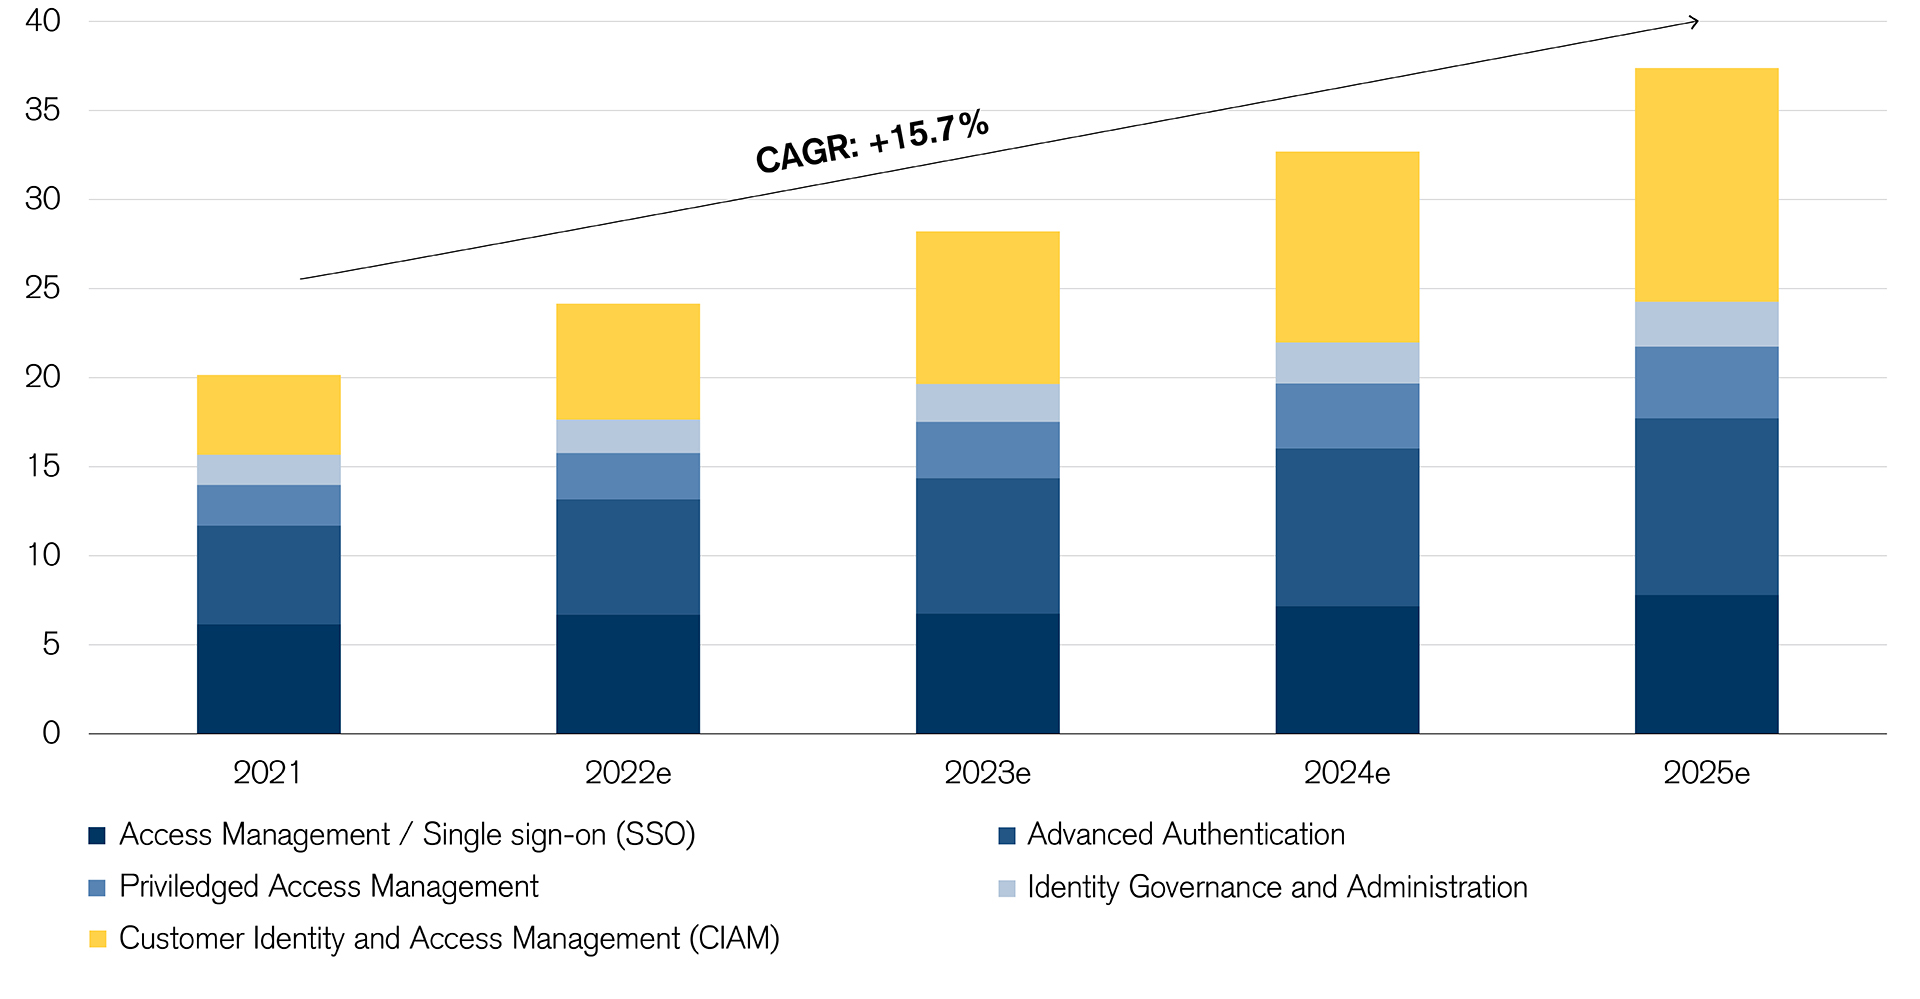 Exhibit 1: The Market for Identity and Access Management (in billion USD)